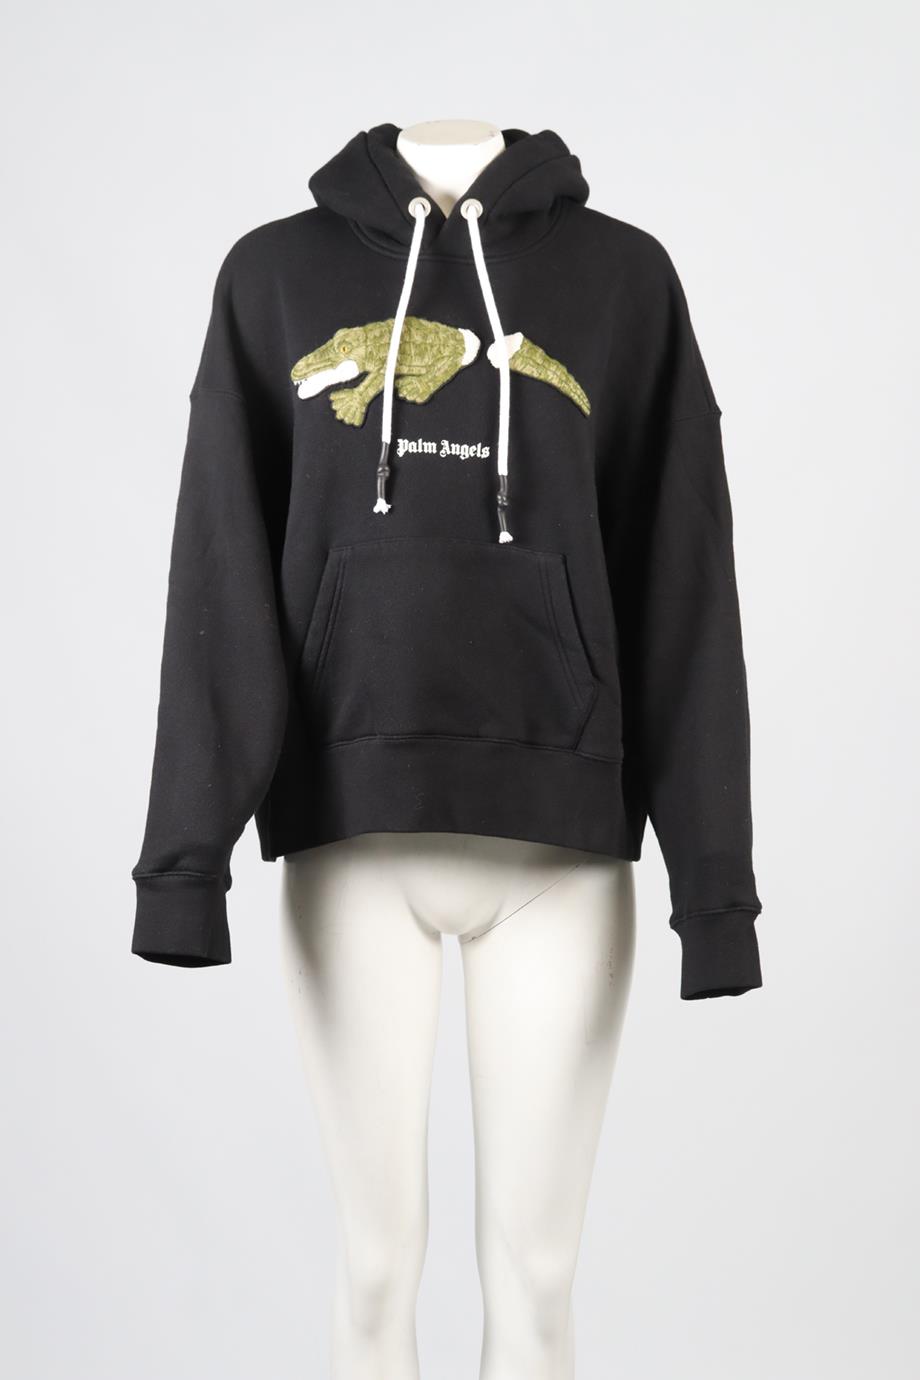 PALM ANGELS COTTON HOODIE SMALL